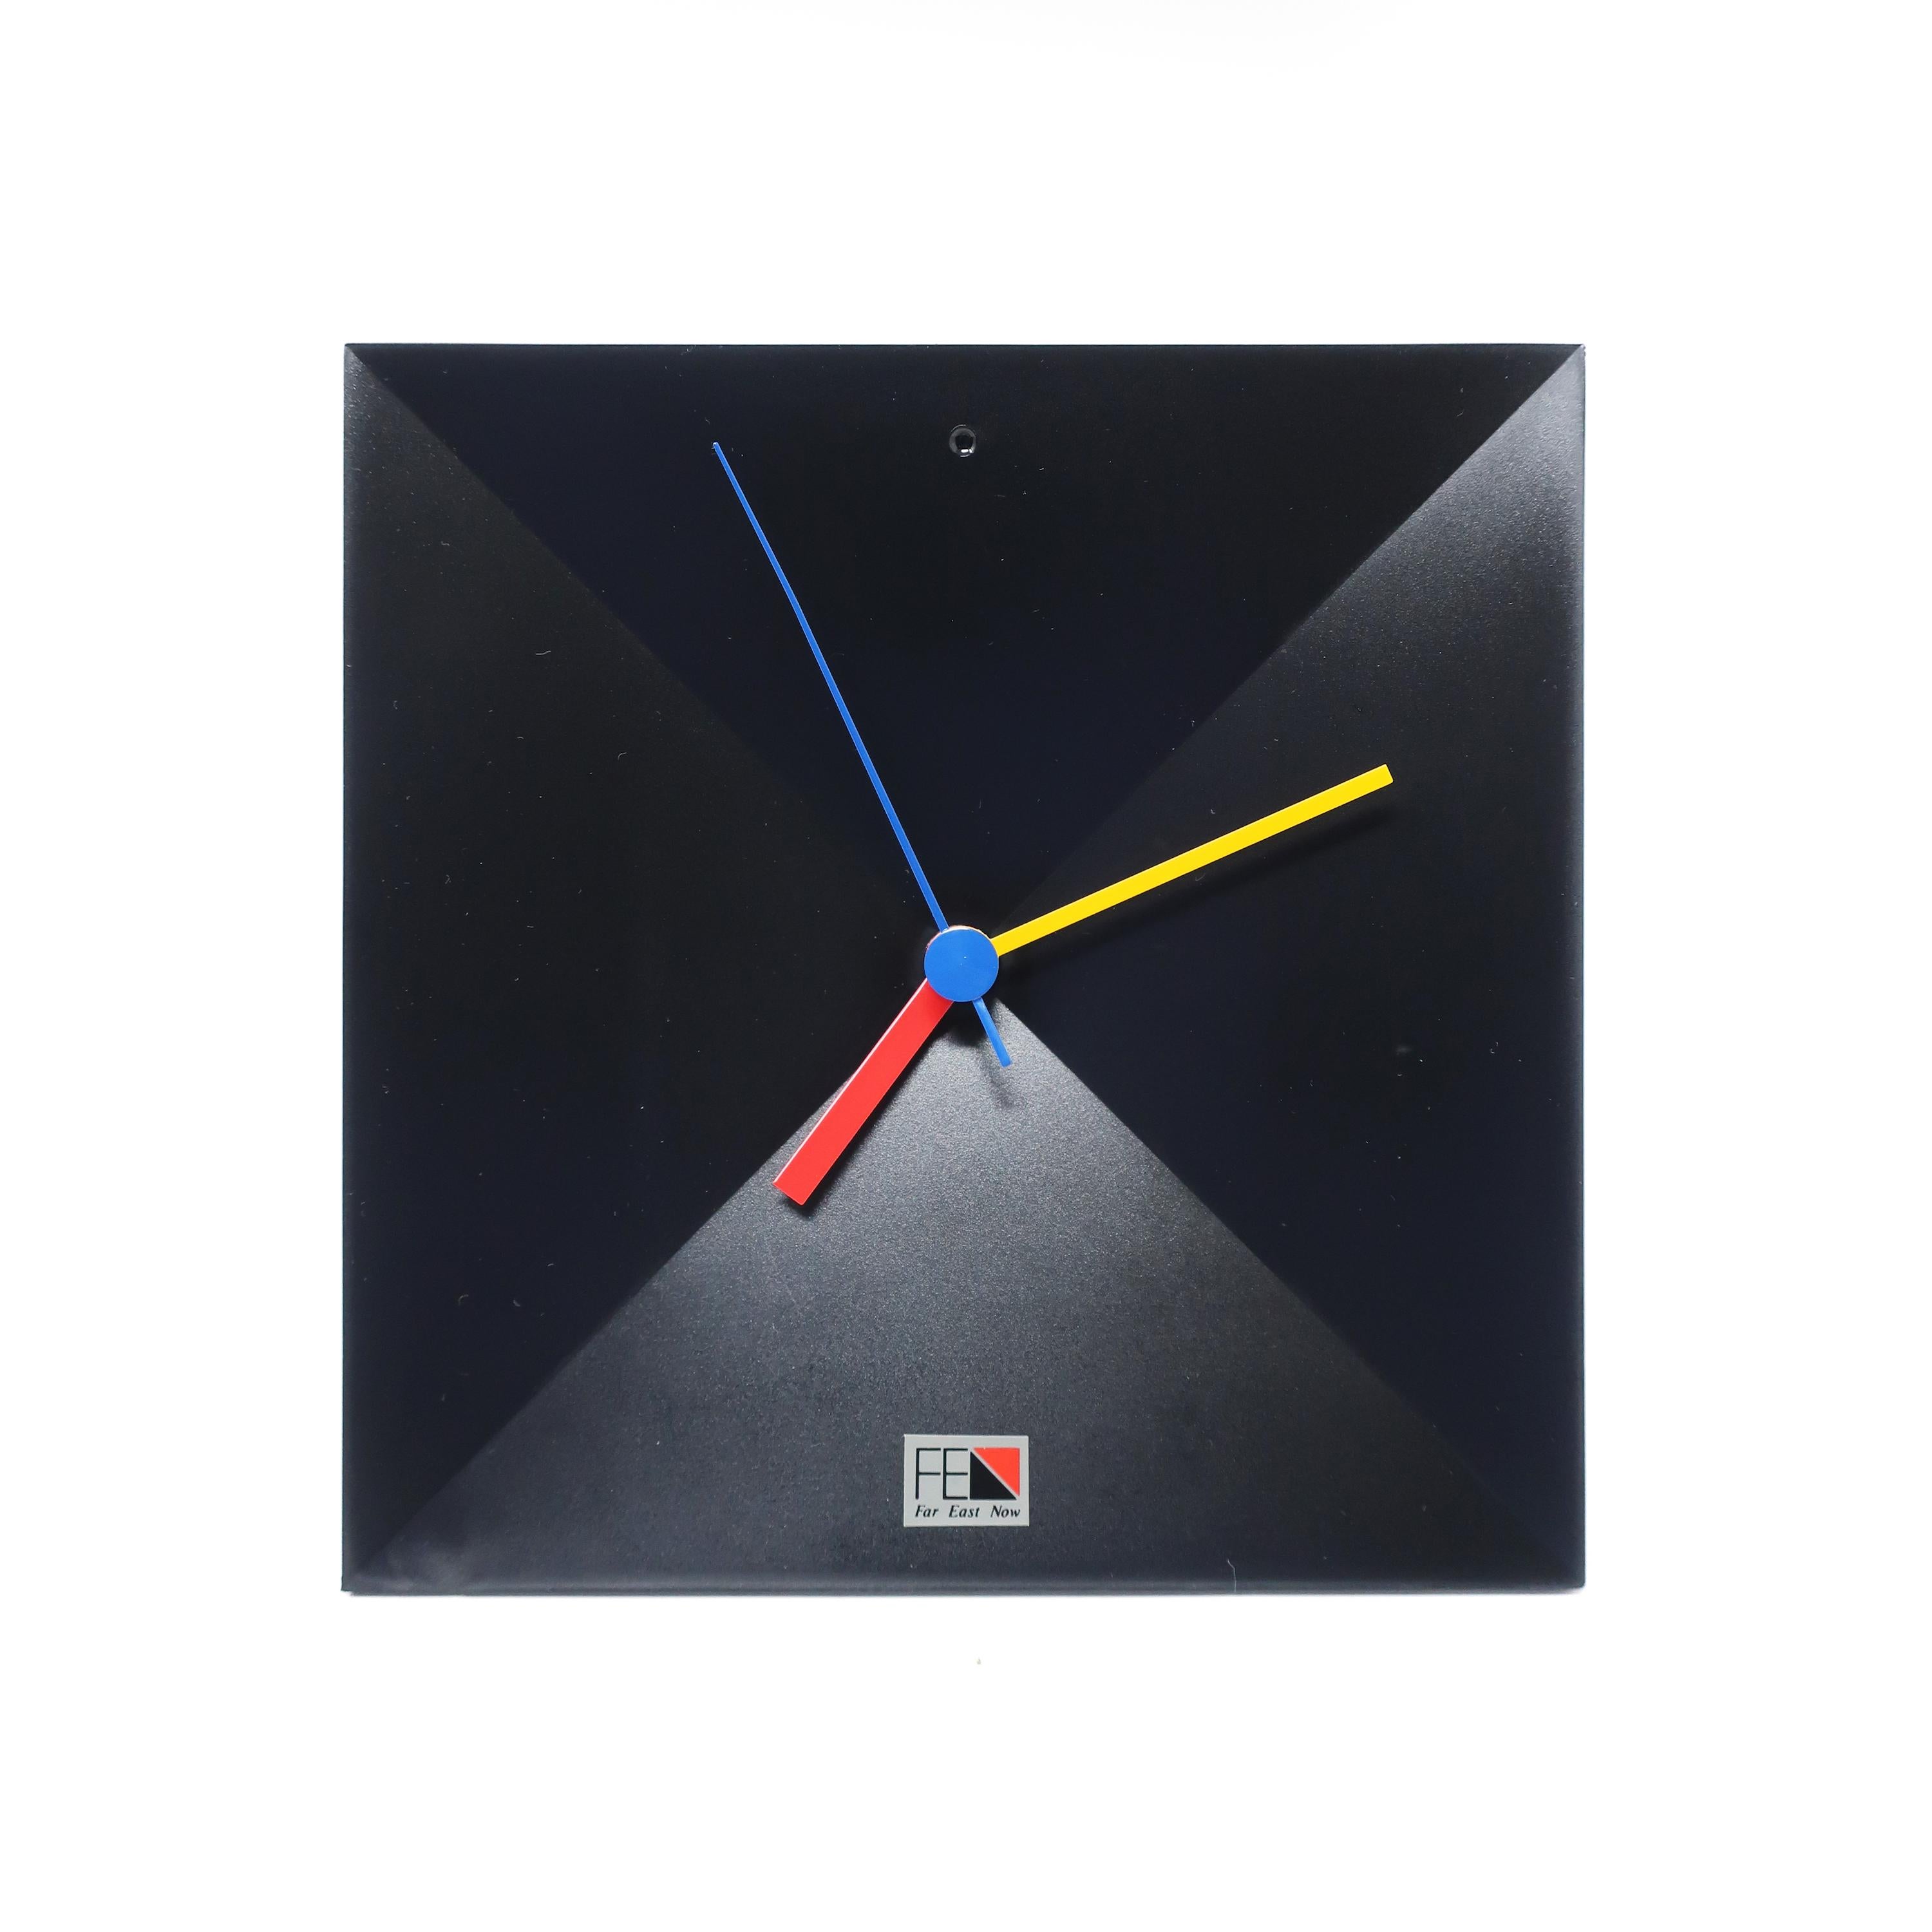 A perfectly 1980s black table or desk clock with yellow, red, and blue accents. The maker, Shiseido, captured the postmodern aesthetic with the use of primary colors, striking angles, and sophisticated lines. 

In good vintage condition with